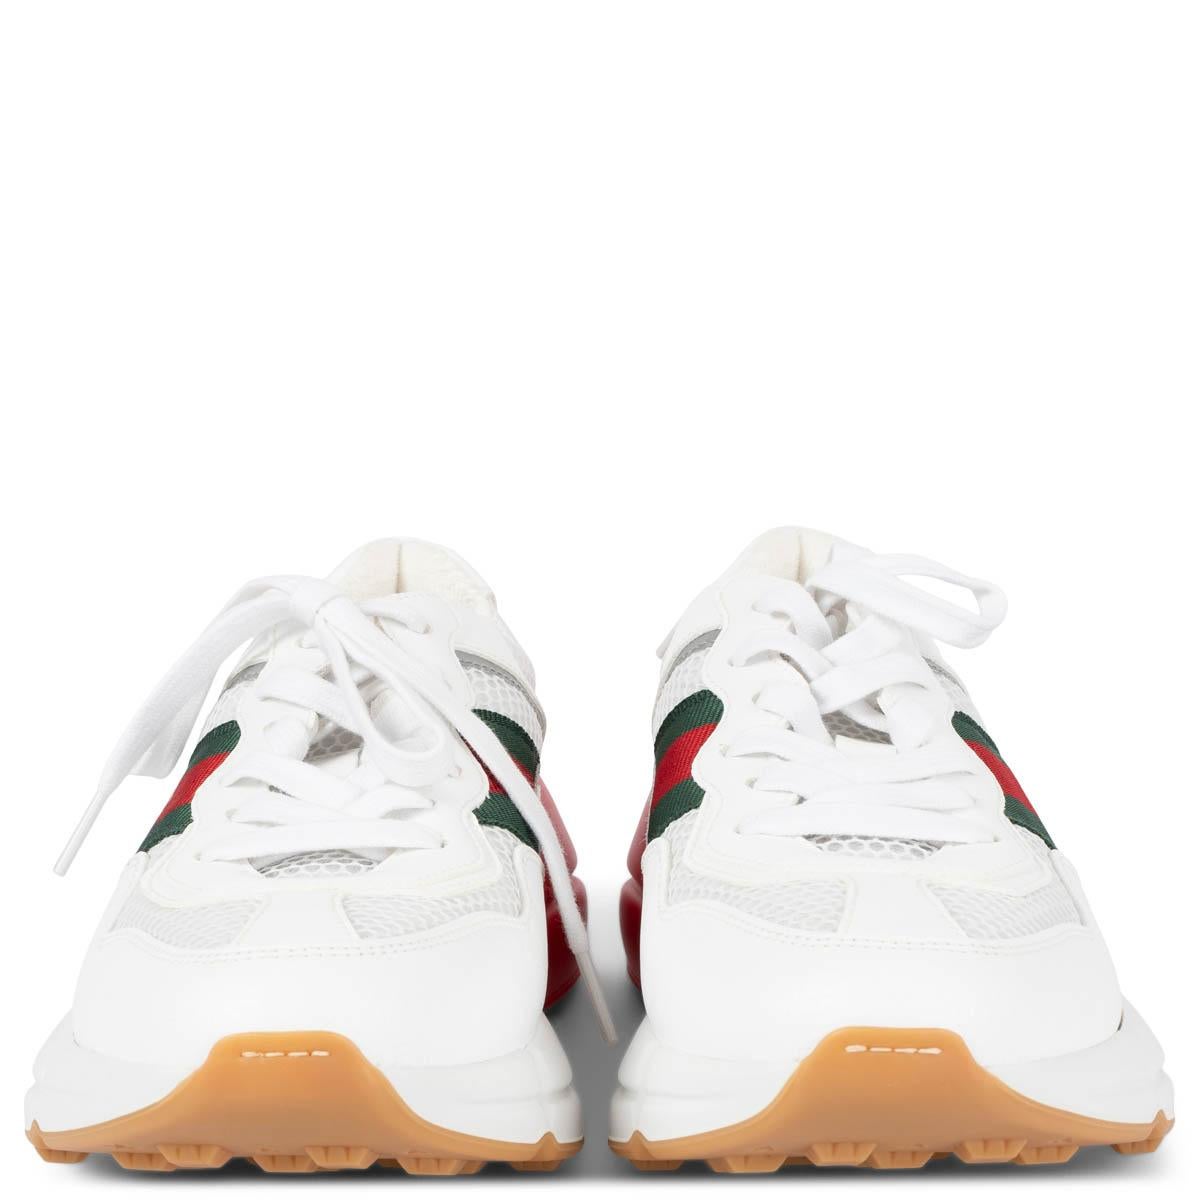 100% authentic Gucci Rython sneakers in white leather and mesh with classic web-stripe in green & red on the side. The design features a chunky white, red and green rubber sole and is lined in white terry cloth. Brand new. Come with dust bags.